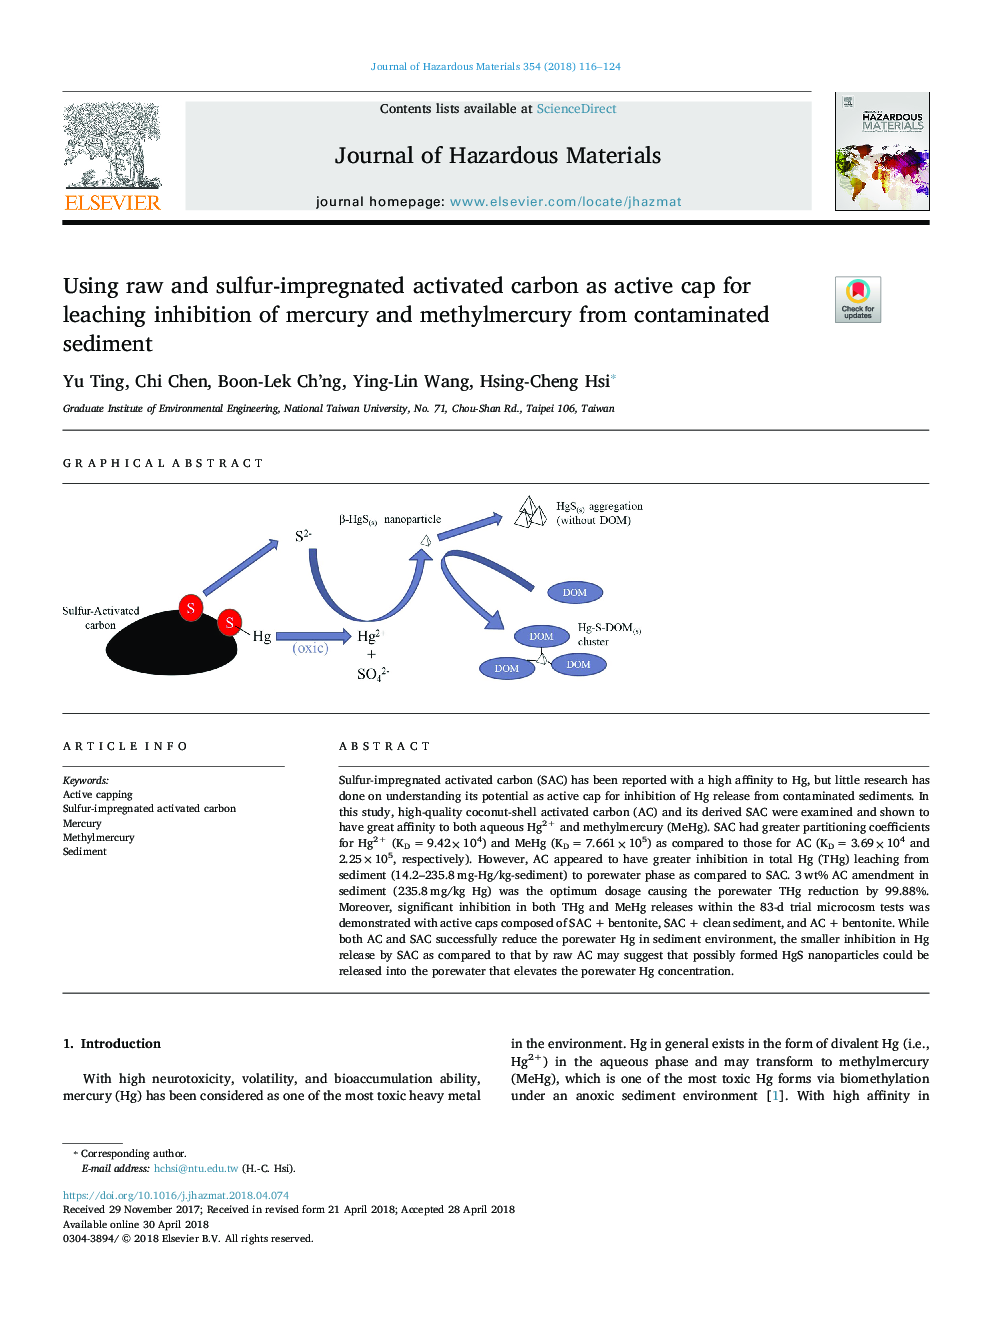 Using raw and sulfur-impregnated activated carbon as active cap for leaching inhibition of mercury and methylmercury from contaminated sediment